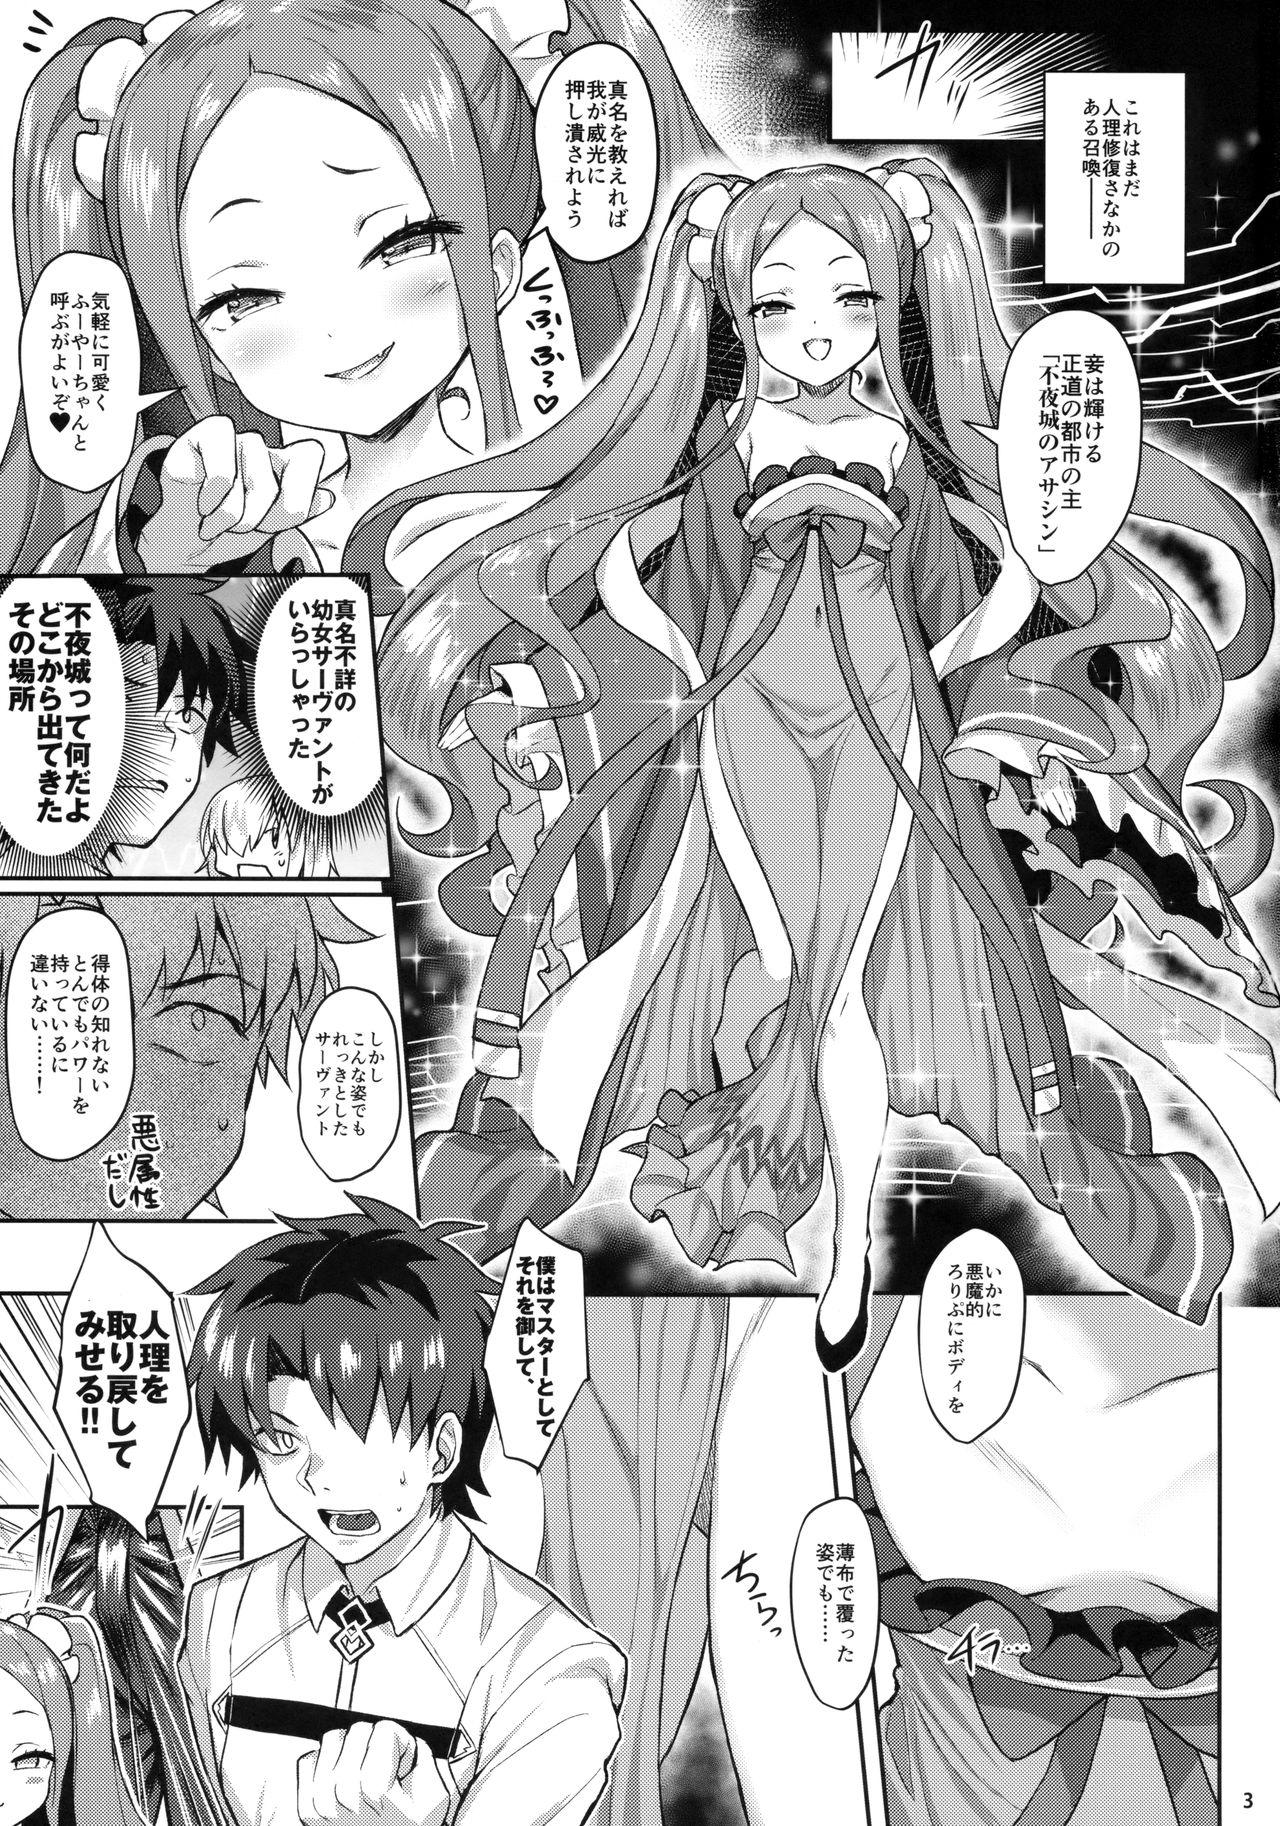 Suck Cock Fuya Syndrome - Sleepless Syndrome - Fate grand order Cum Shot - Page 2